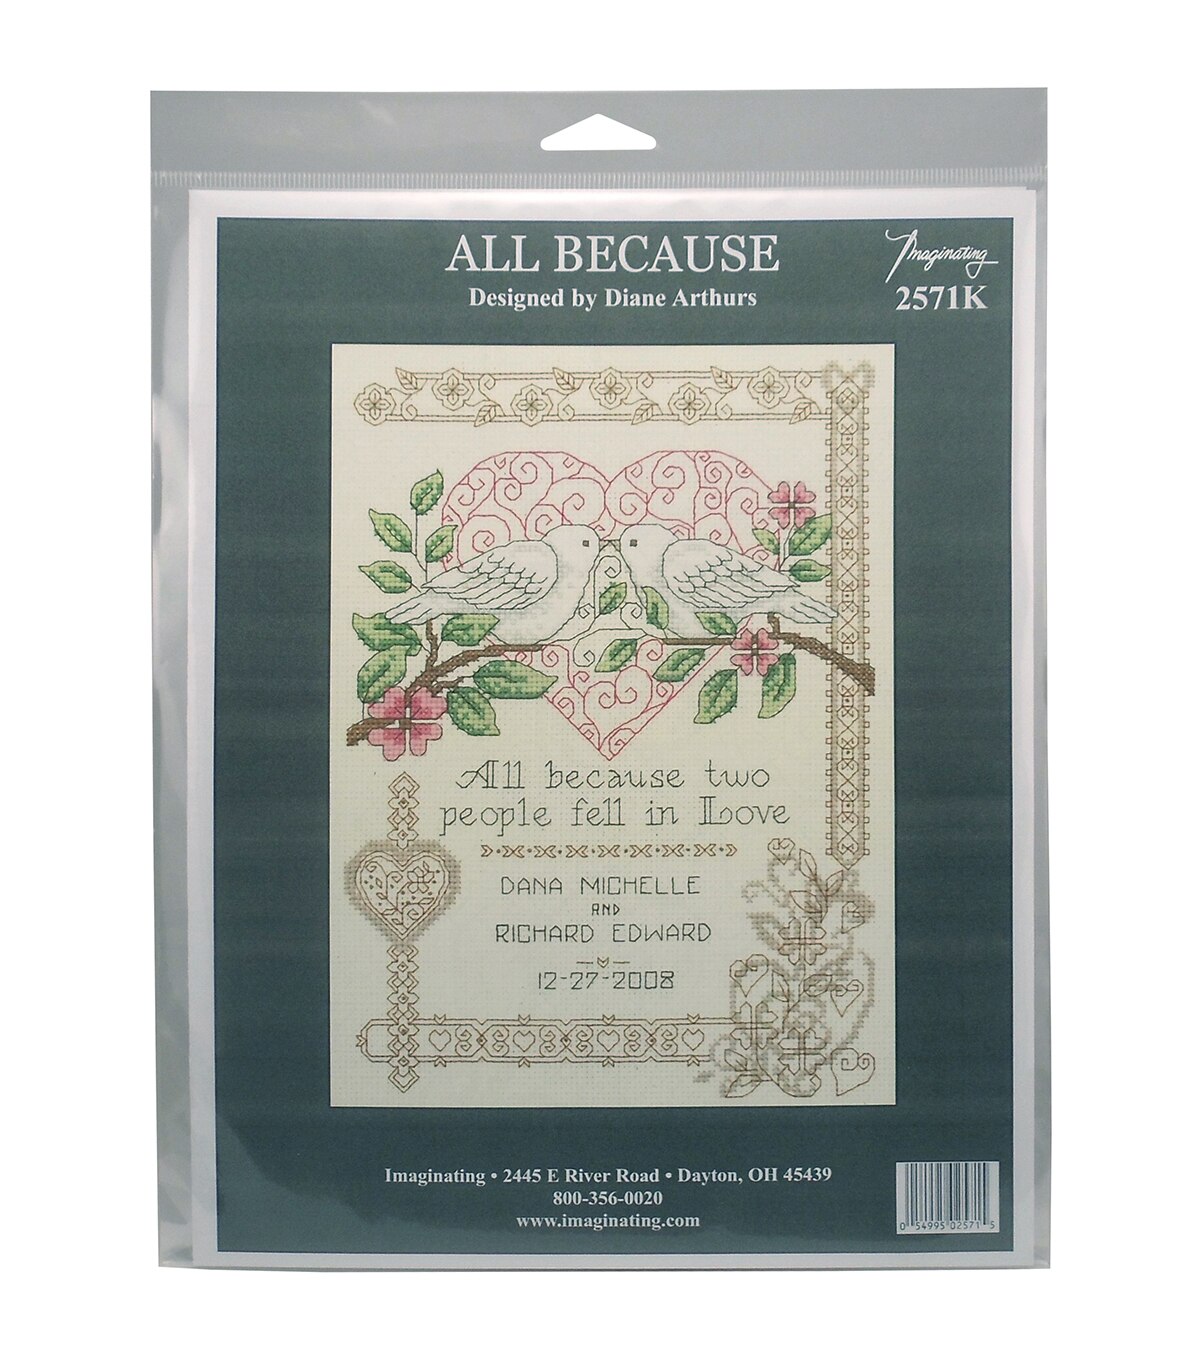 Imaginating All Because Wedding Record Counted Cross Stitch Kit | JOANN